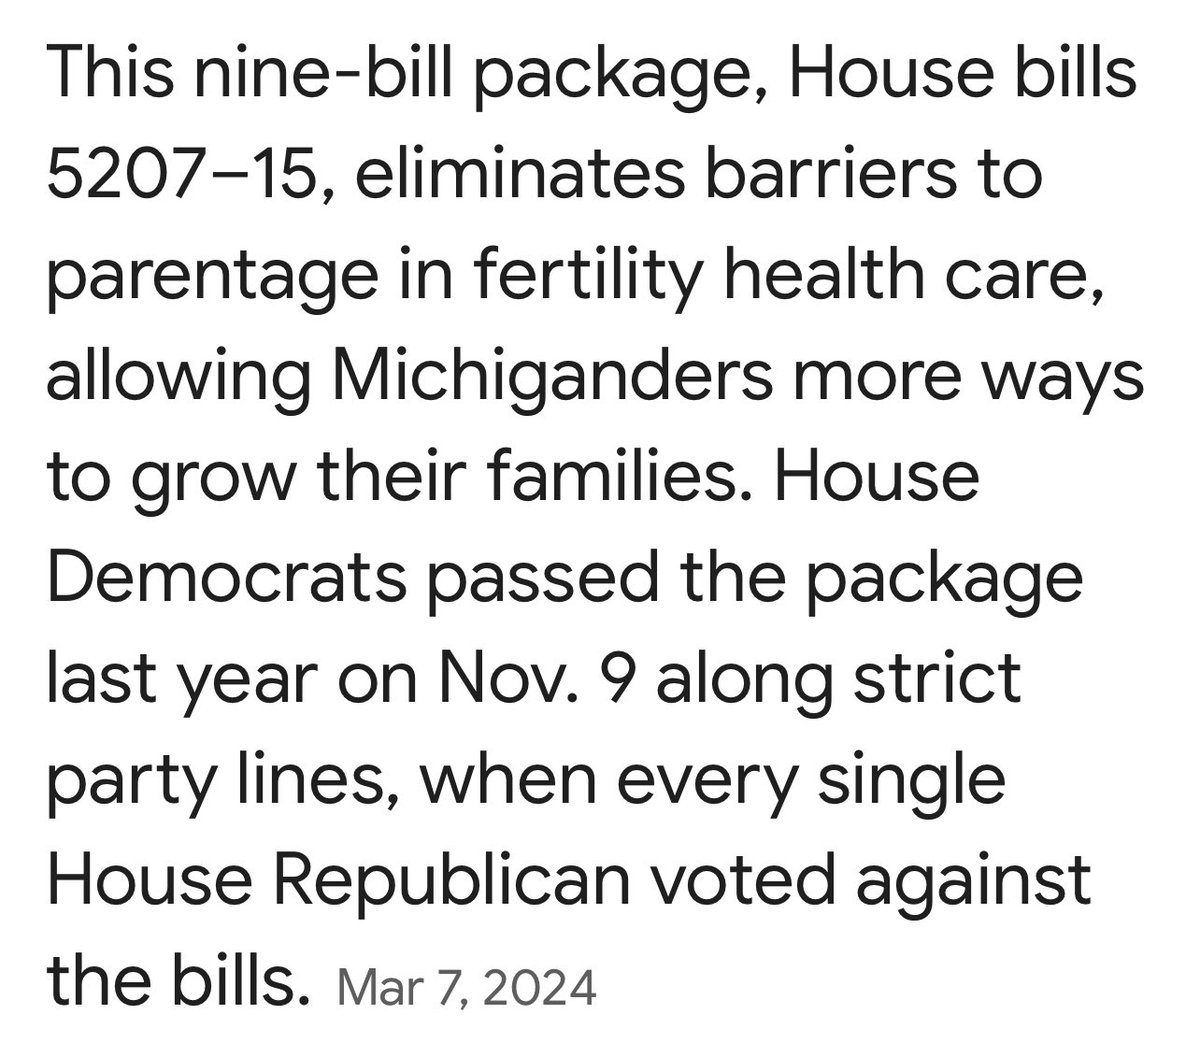 If you are one of the 13,000 Michigan couples who applied for the contest on @MojoInTheMorn to have your IVF treatments paid for, you should know that every single MI House Republican voted against protecting IVF. Was just listening and one happy Chaldean couple just won and we